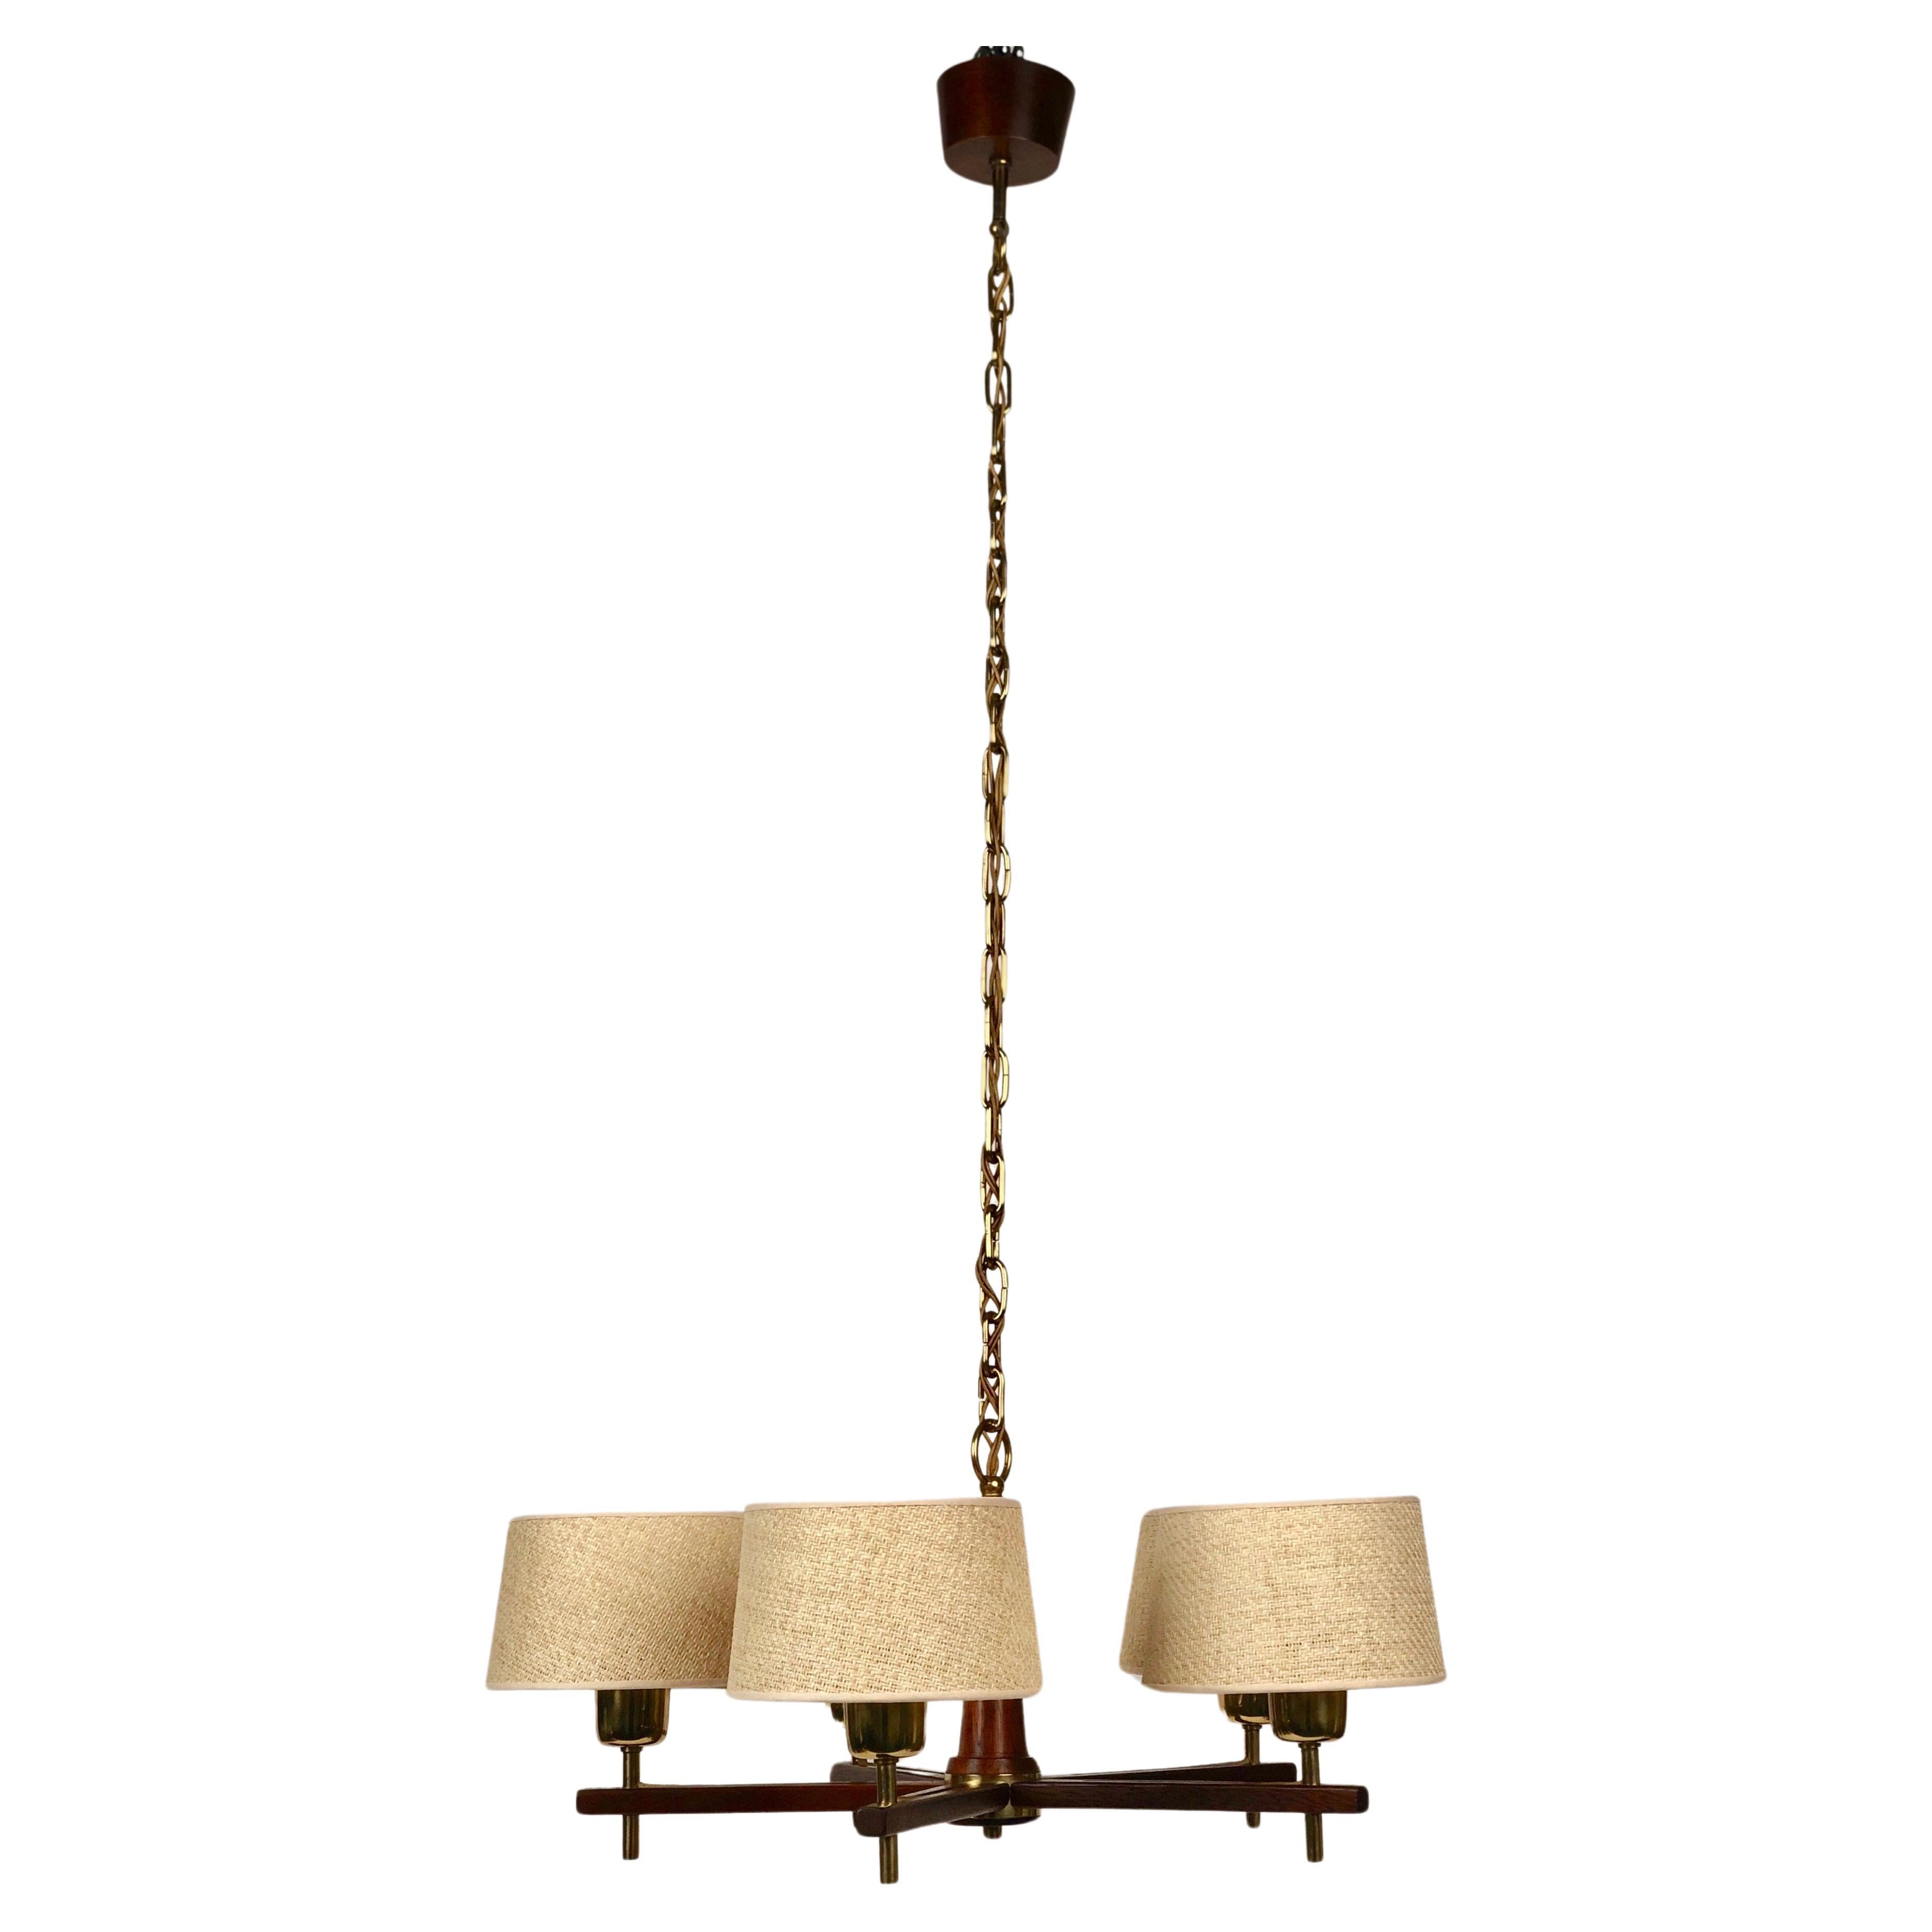 Five Arms Chandelier in Teak Wood and Brass with Cane Shades, 1960, Austria For Sale